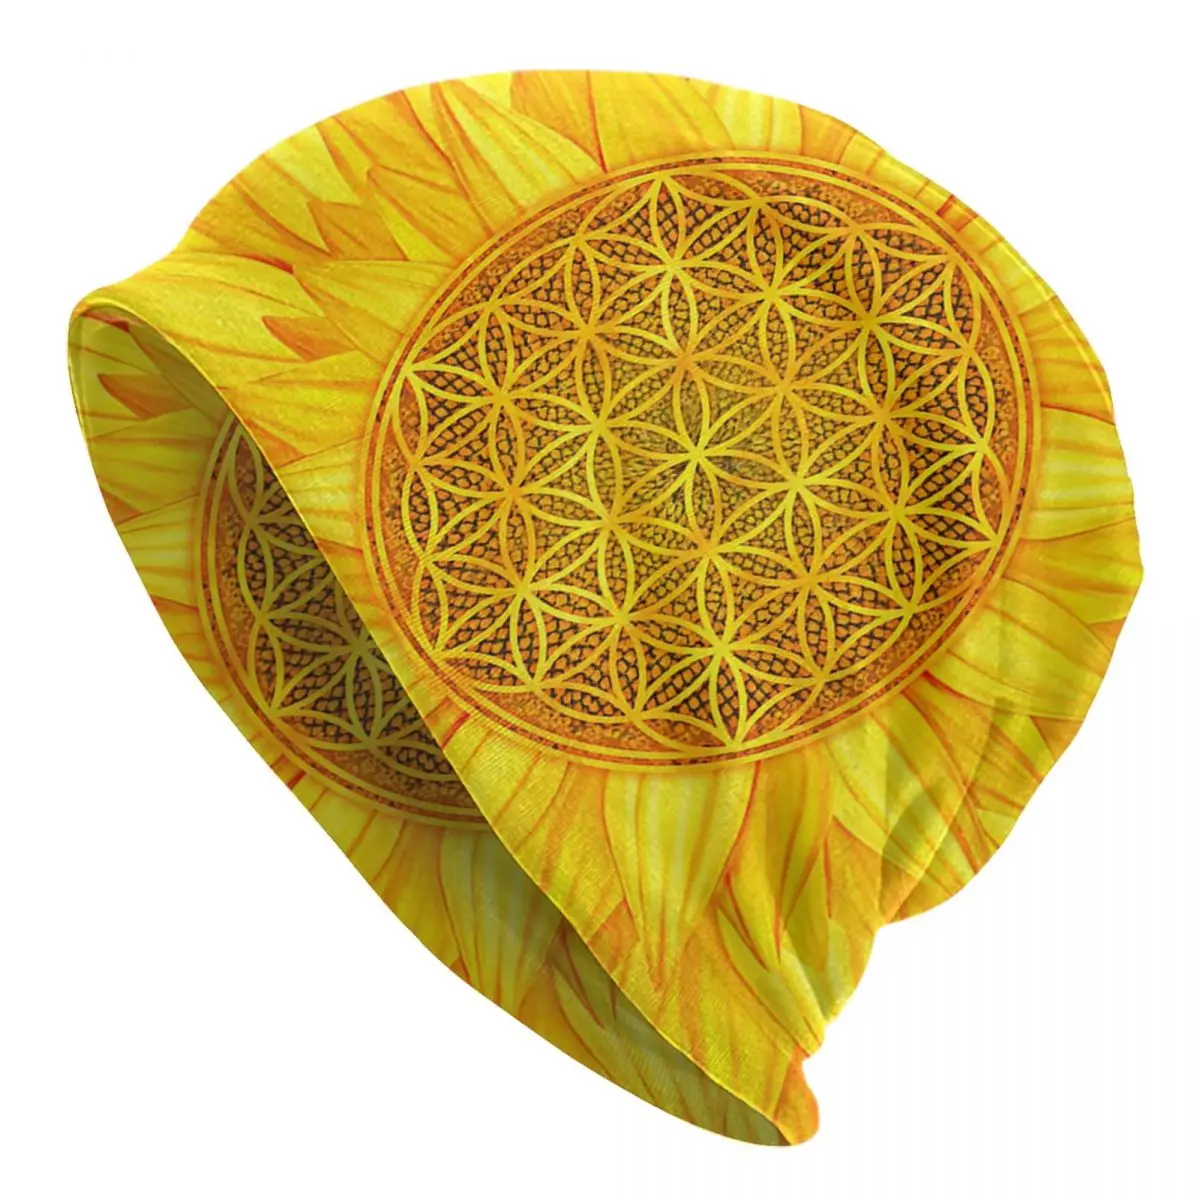 Flower Of Life -Sunflower Adult Men's Women's Knit Hat Keep warm winter Funny knitted hat